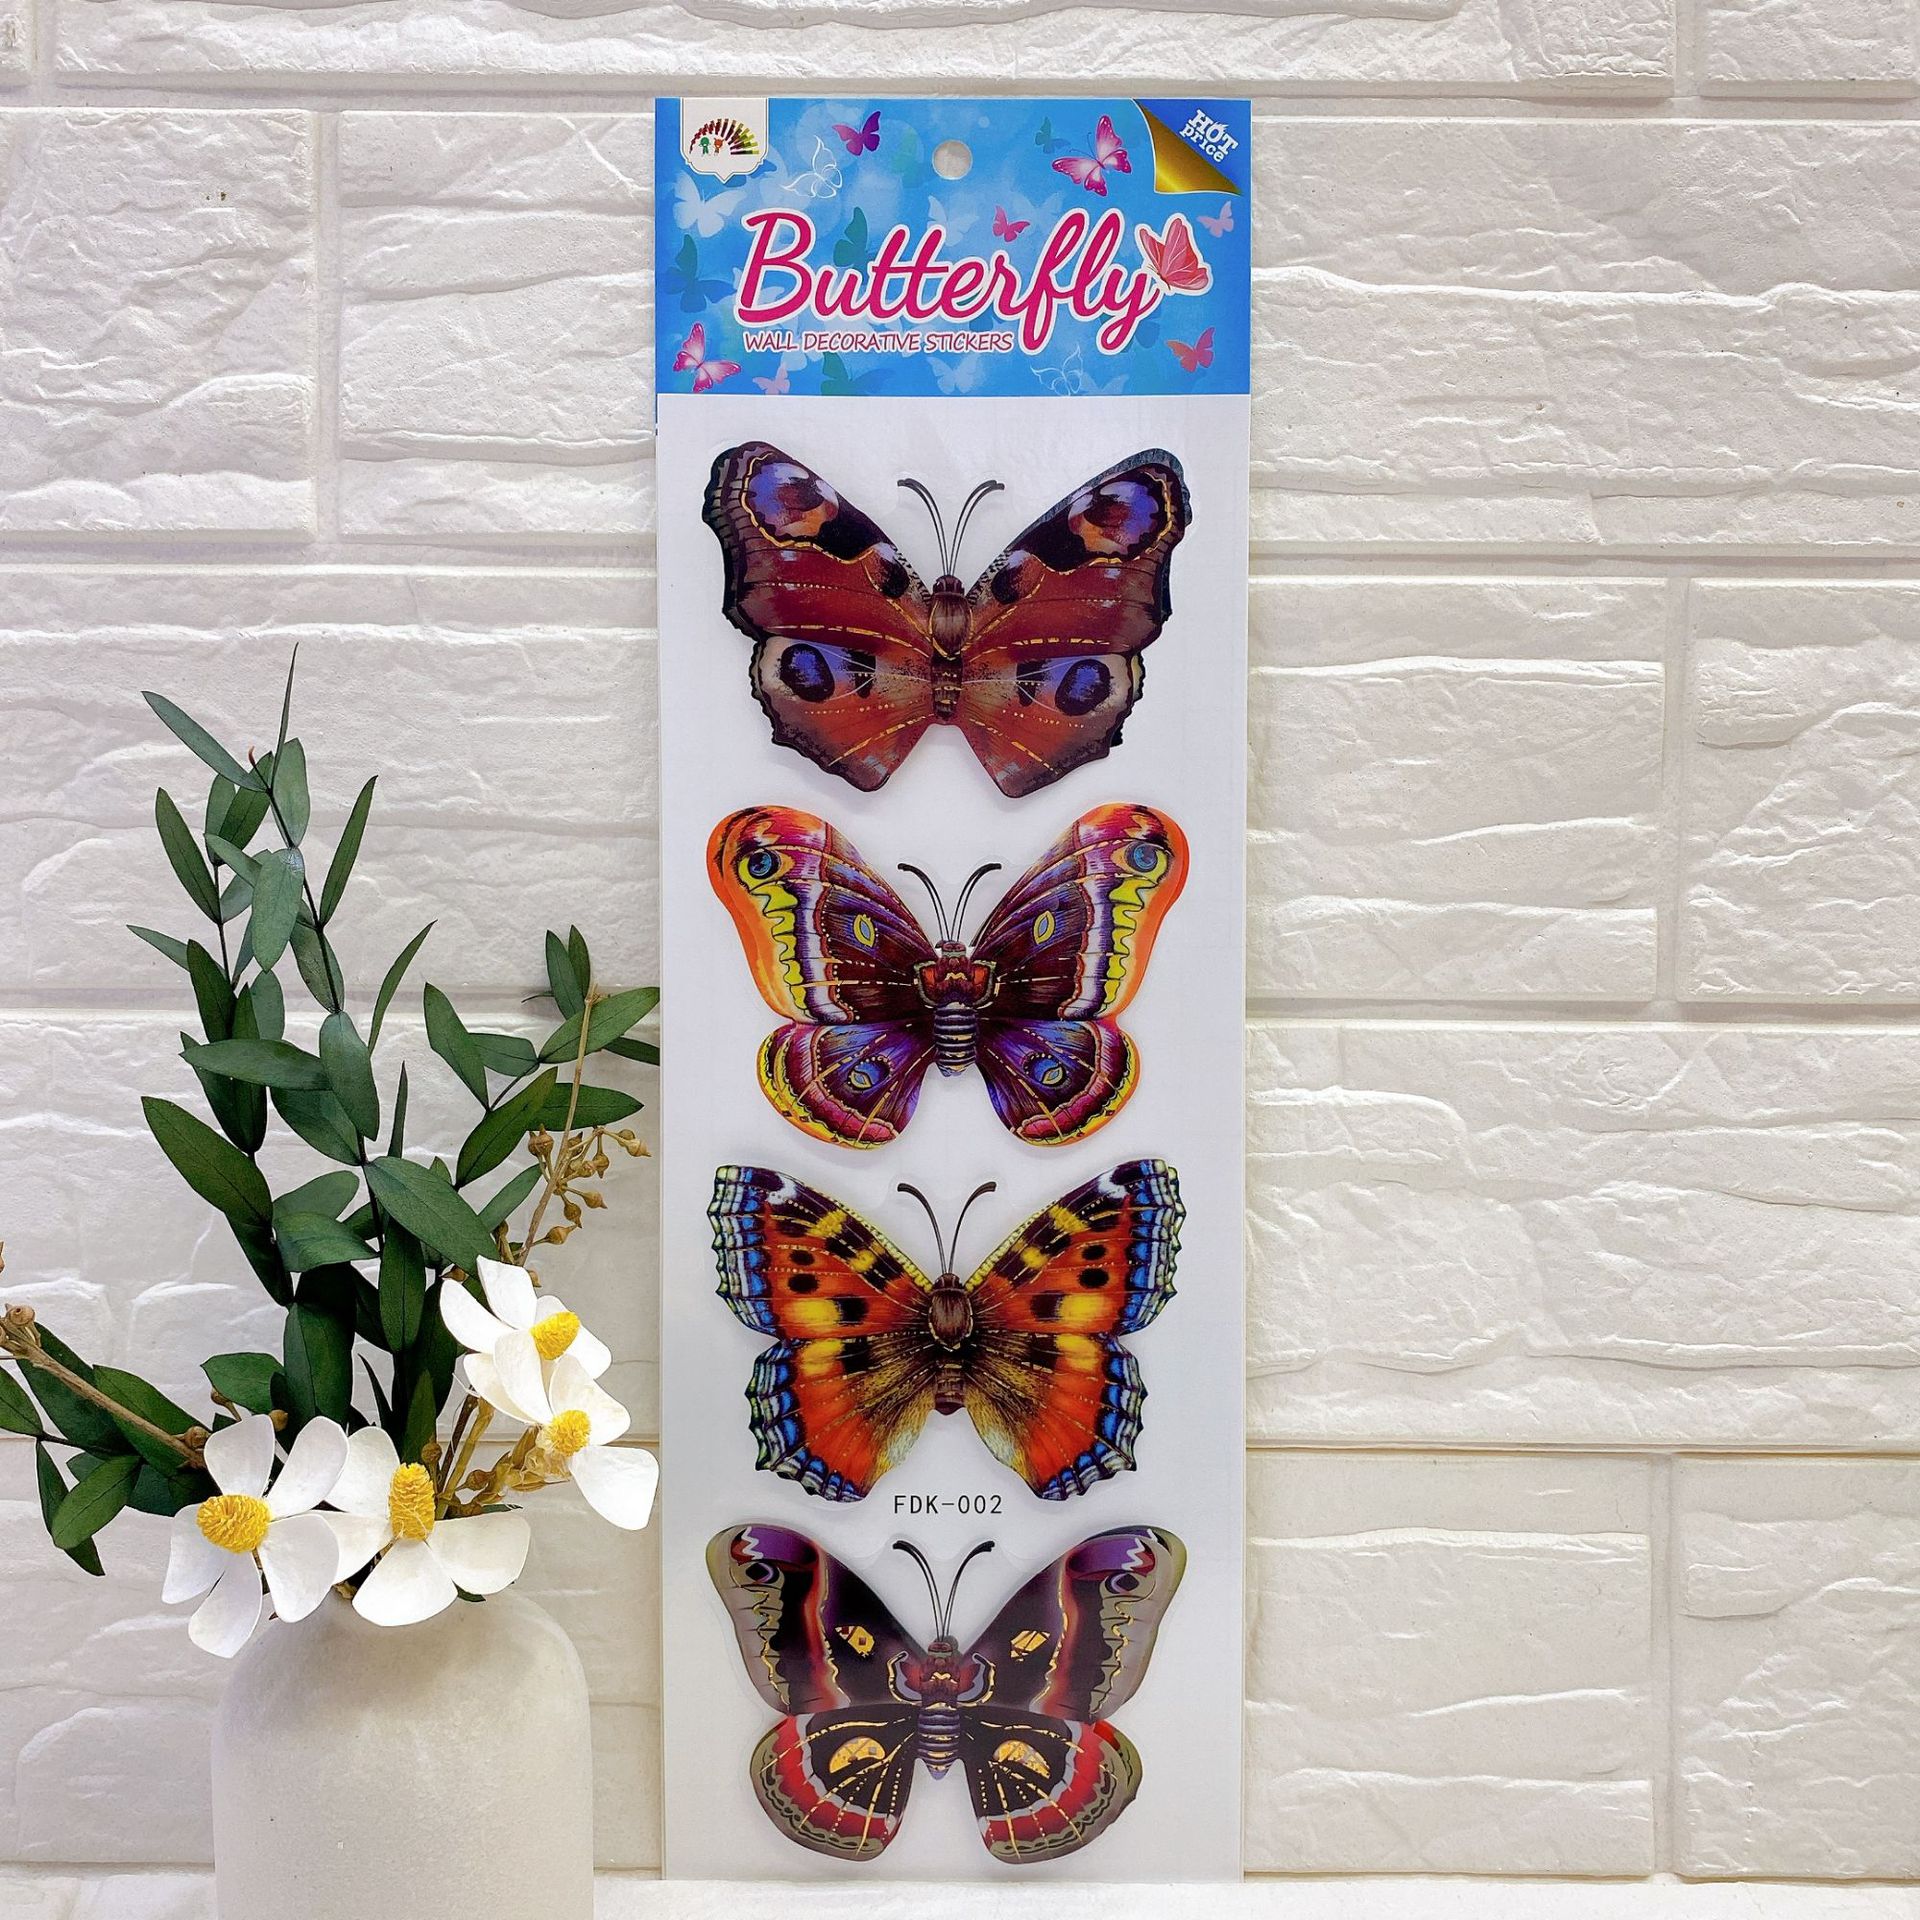 Gilding Four Butterflies Three-Dimensional Stickers Living Room Bedroom Wall Home Decoration Wall Stickers 3D Three-Dimensional Handmade Layer Wall